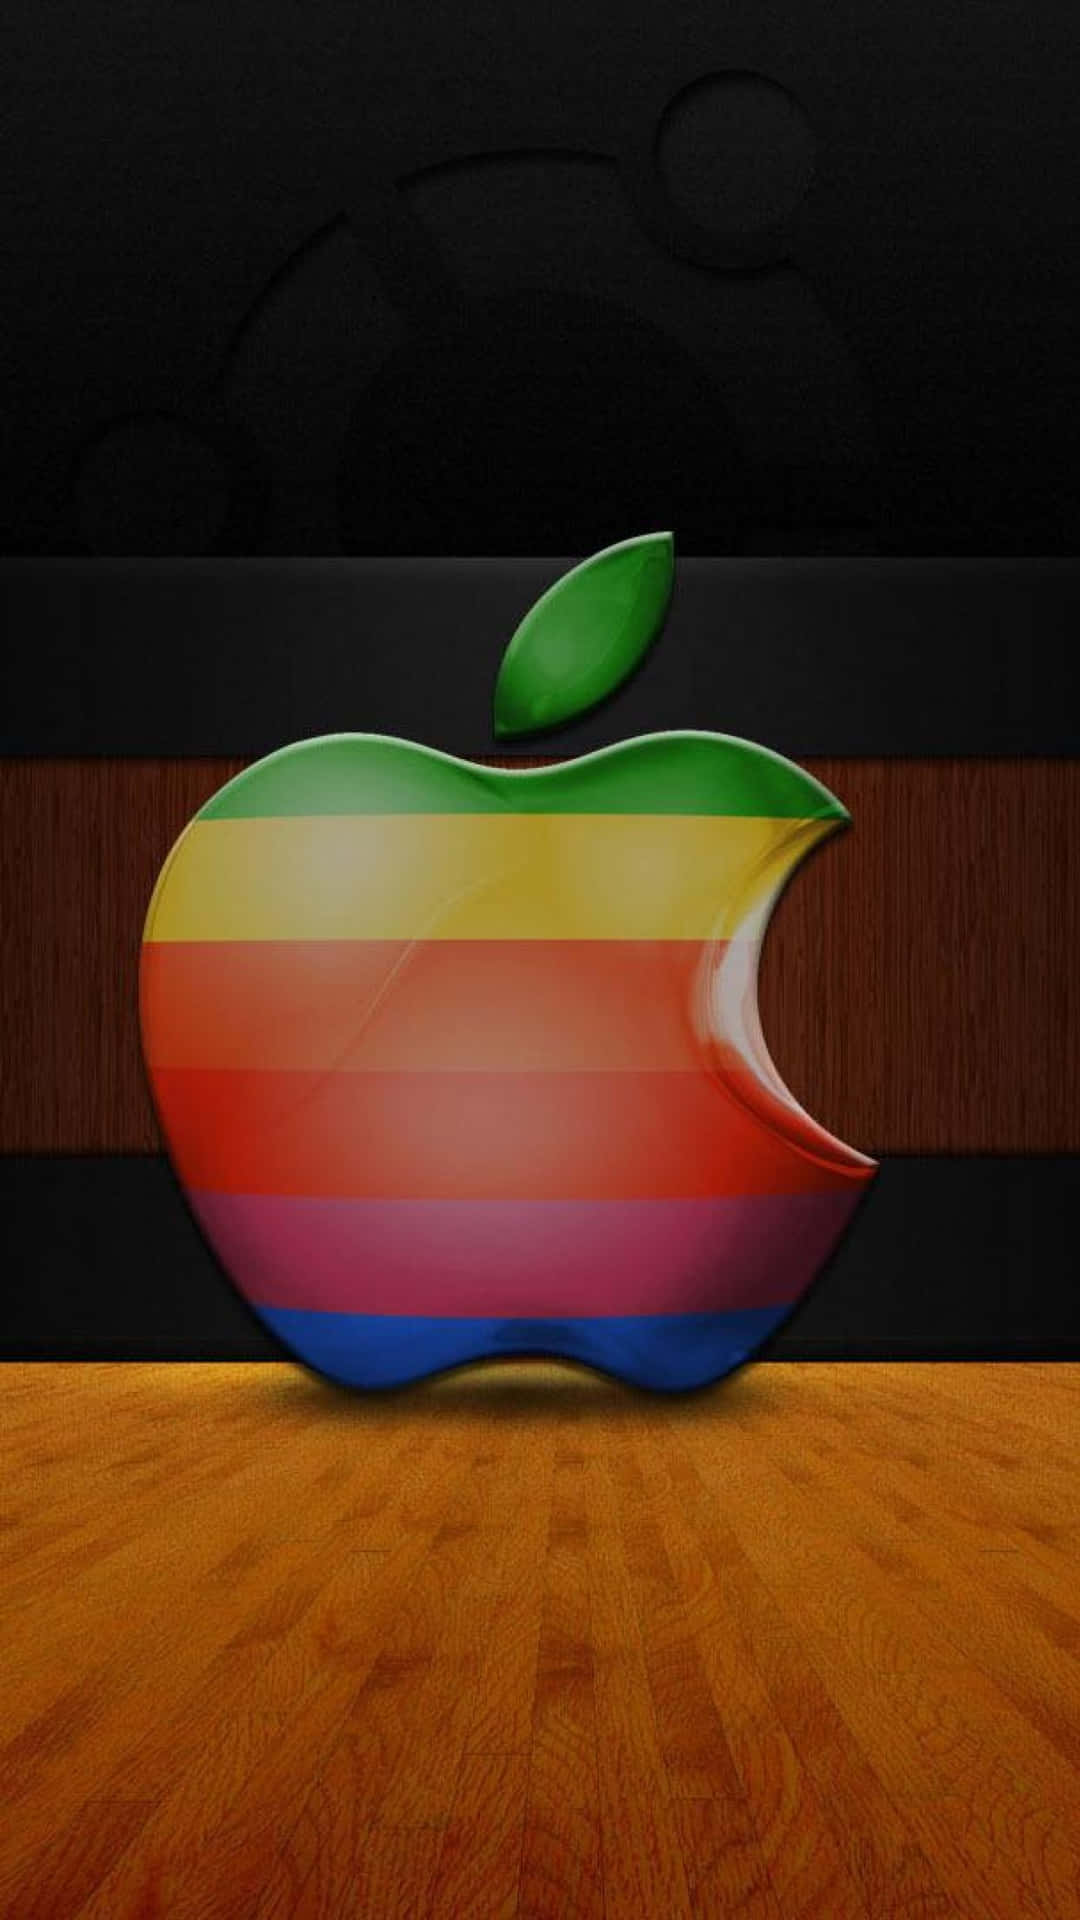 Download Apple Pictures | Wallpapers.com